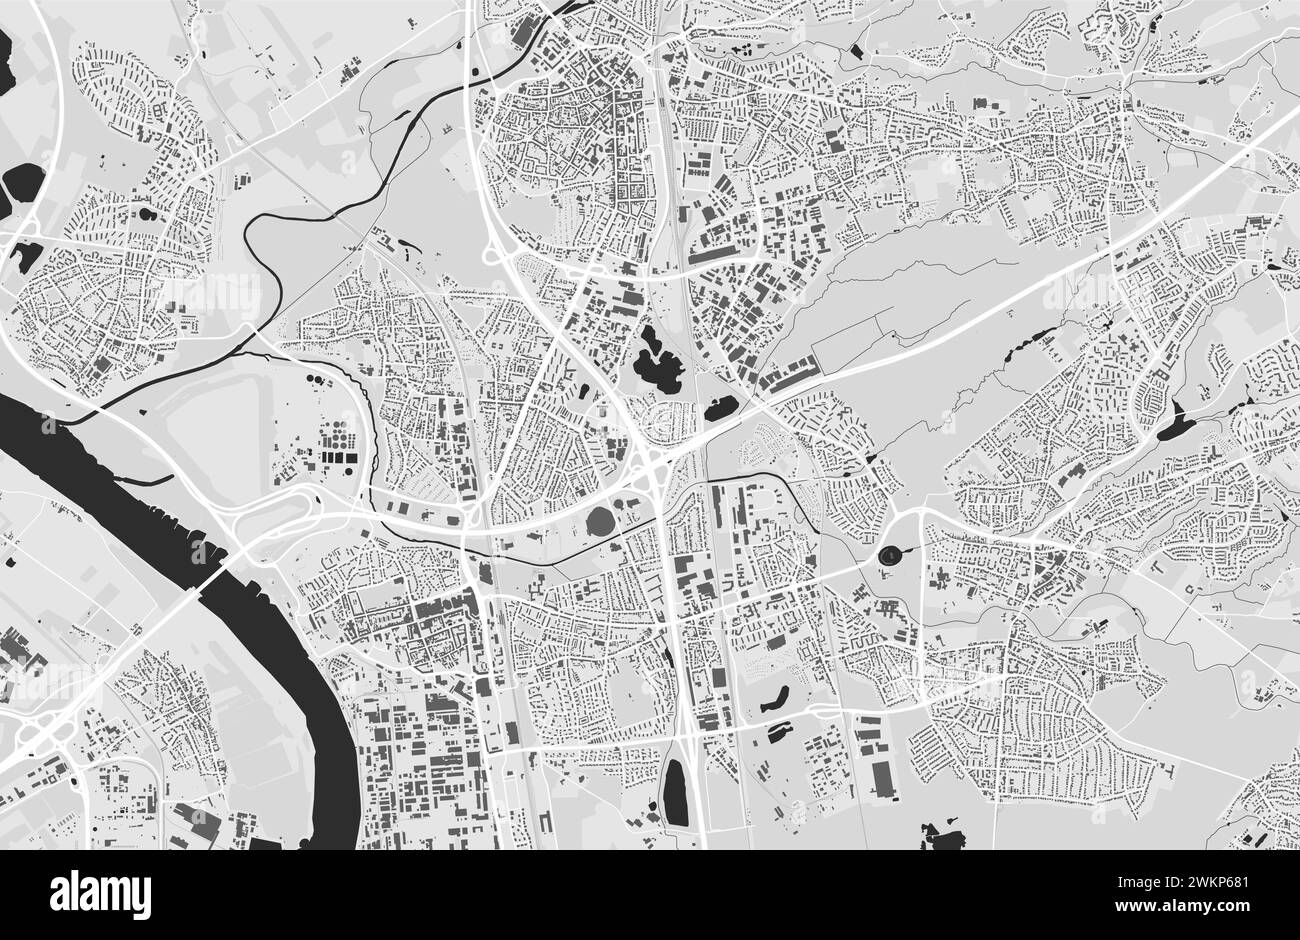 Leverkusen map, Germany. Grayscale color city map, vector streetmap with roads and rivers. Stock Vector